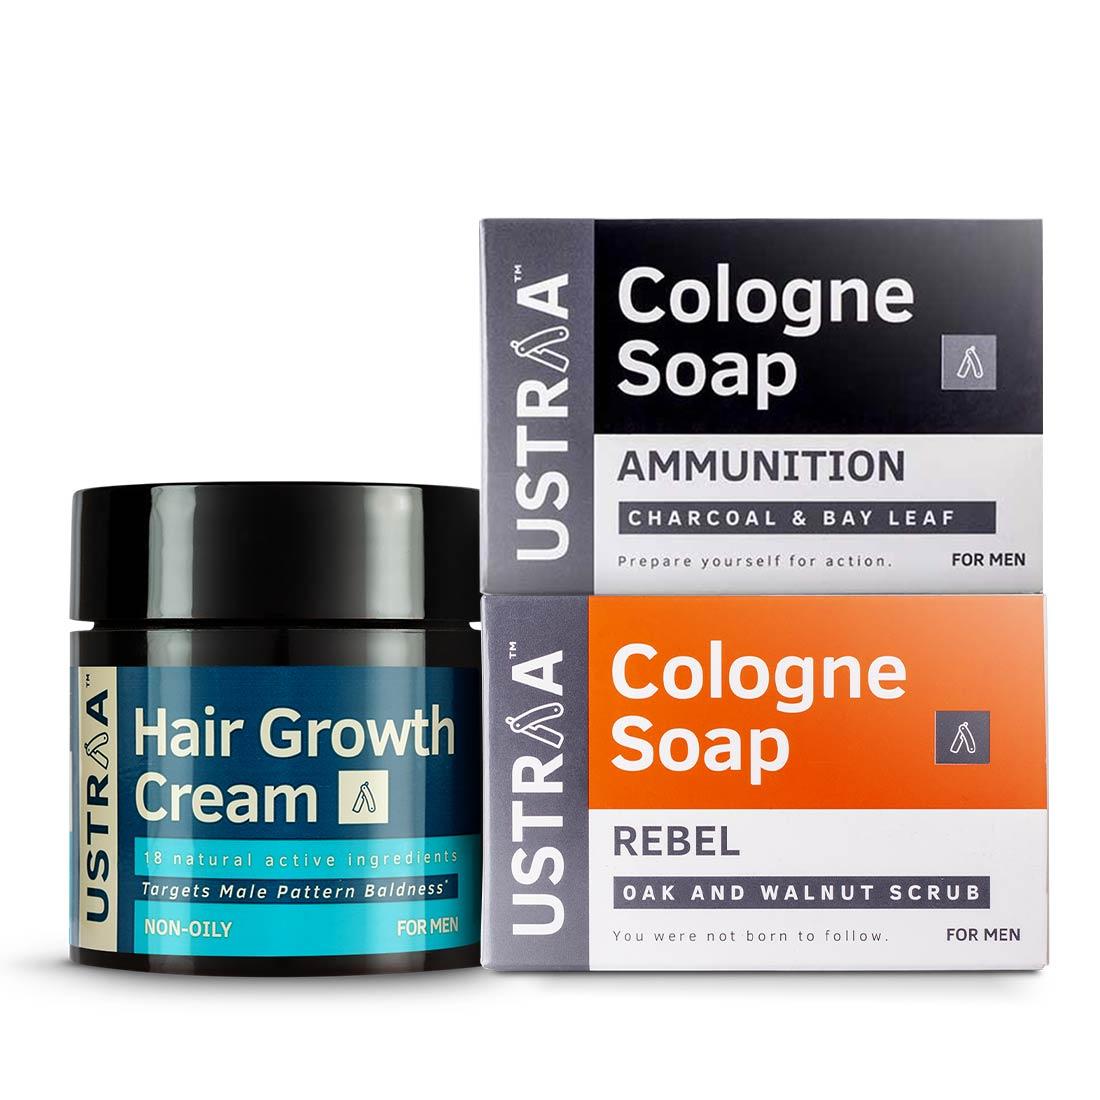 Hair Growth Cream and  Ammunition & Rebel Cologne Soaps